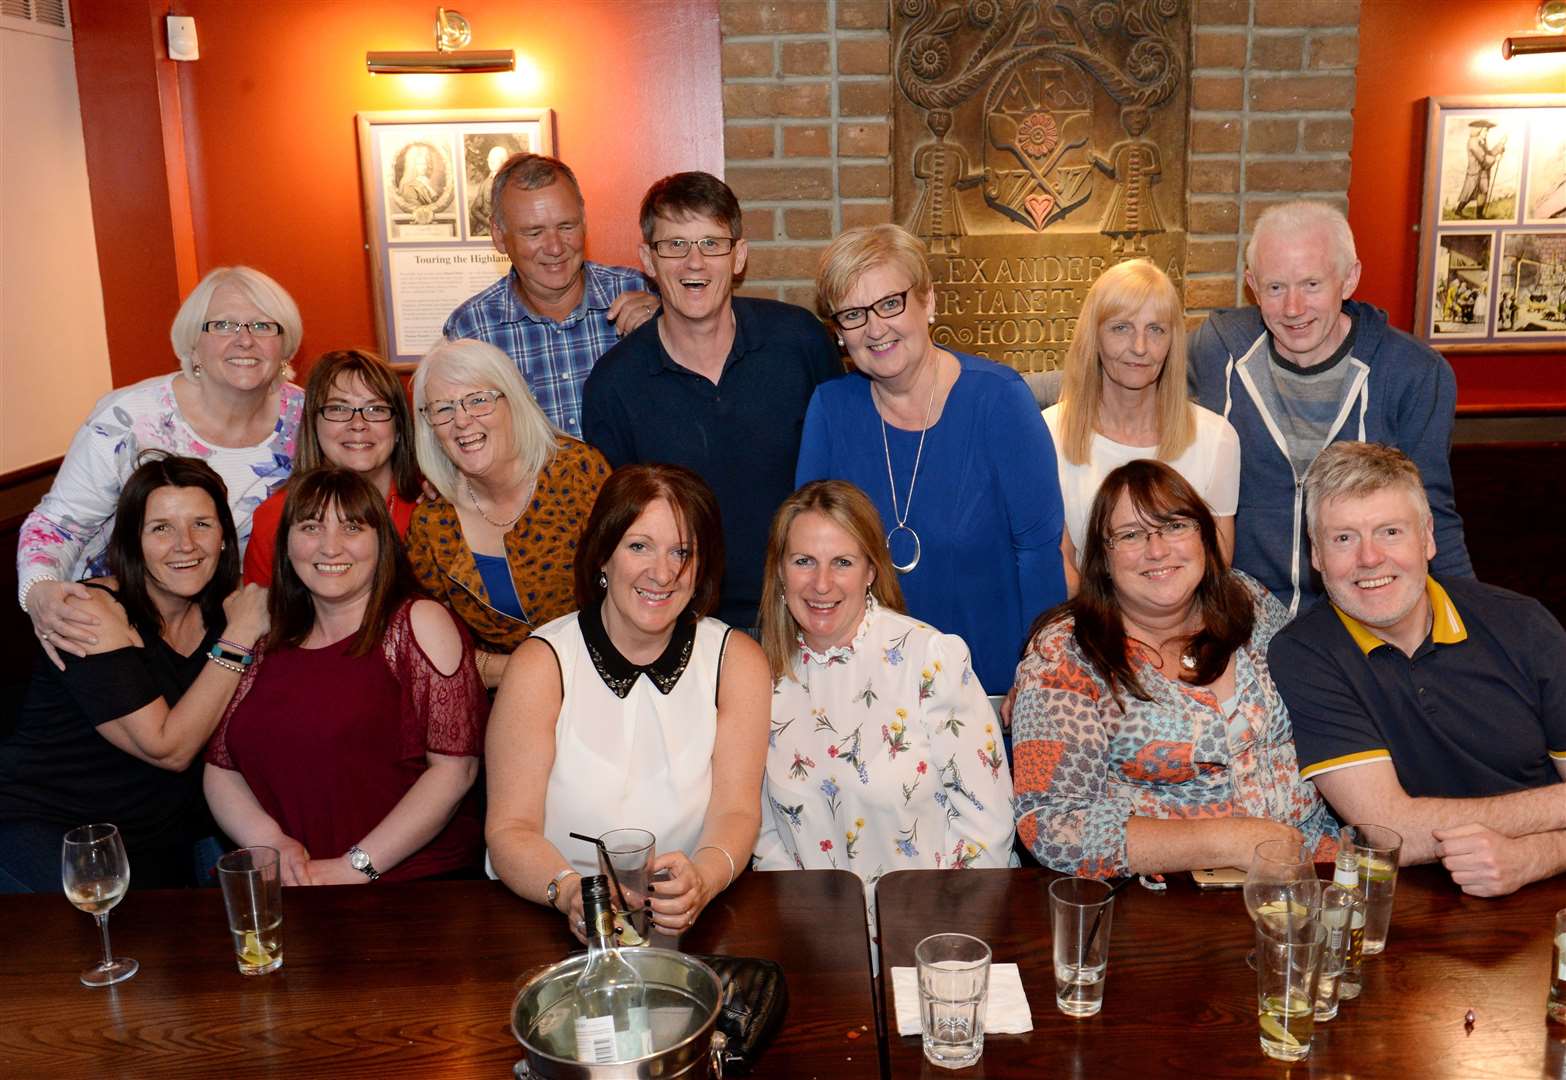 City Seen..Former colleagues of Inverness Post Office enjoy reunion night..Picture: Gary Anthony. Image No.037833.